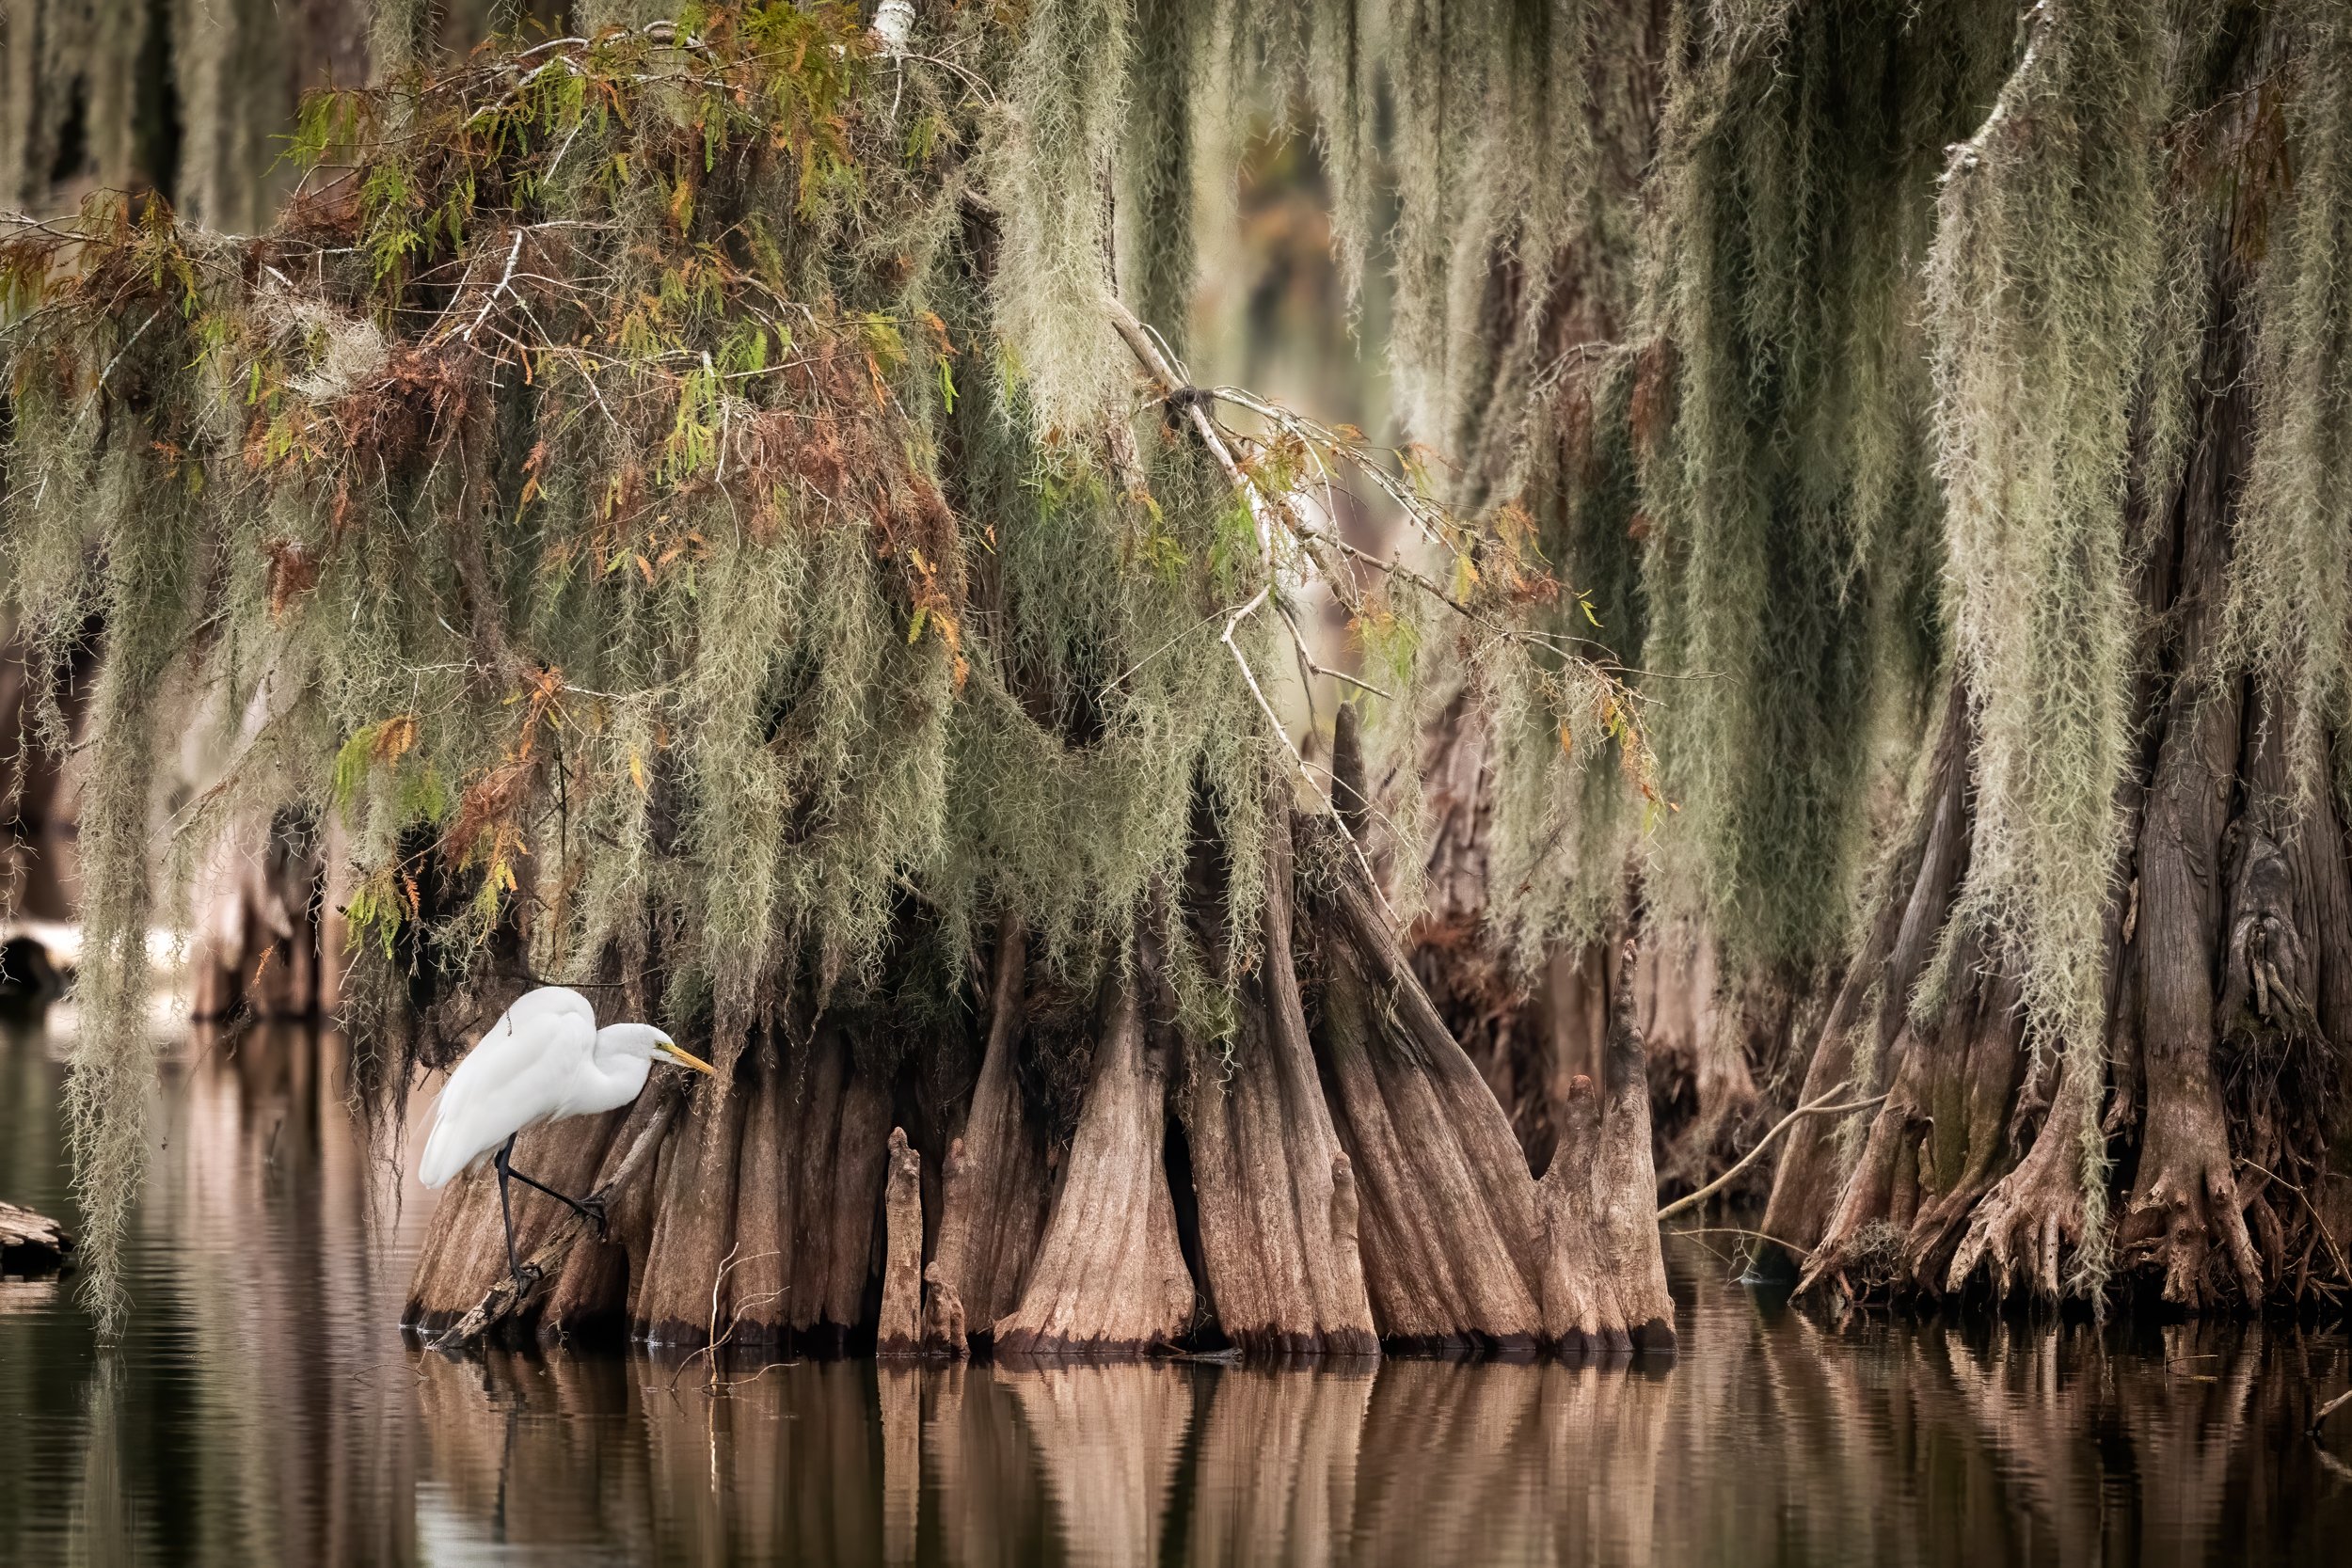  A Great Egre at the base of a large Cypress Tree. Hunting for fish in the still waters of Lake Martin in Louisiana. Cypress Trees, Spanish Mossn and a Great Egret. 